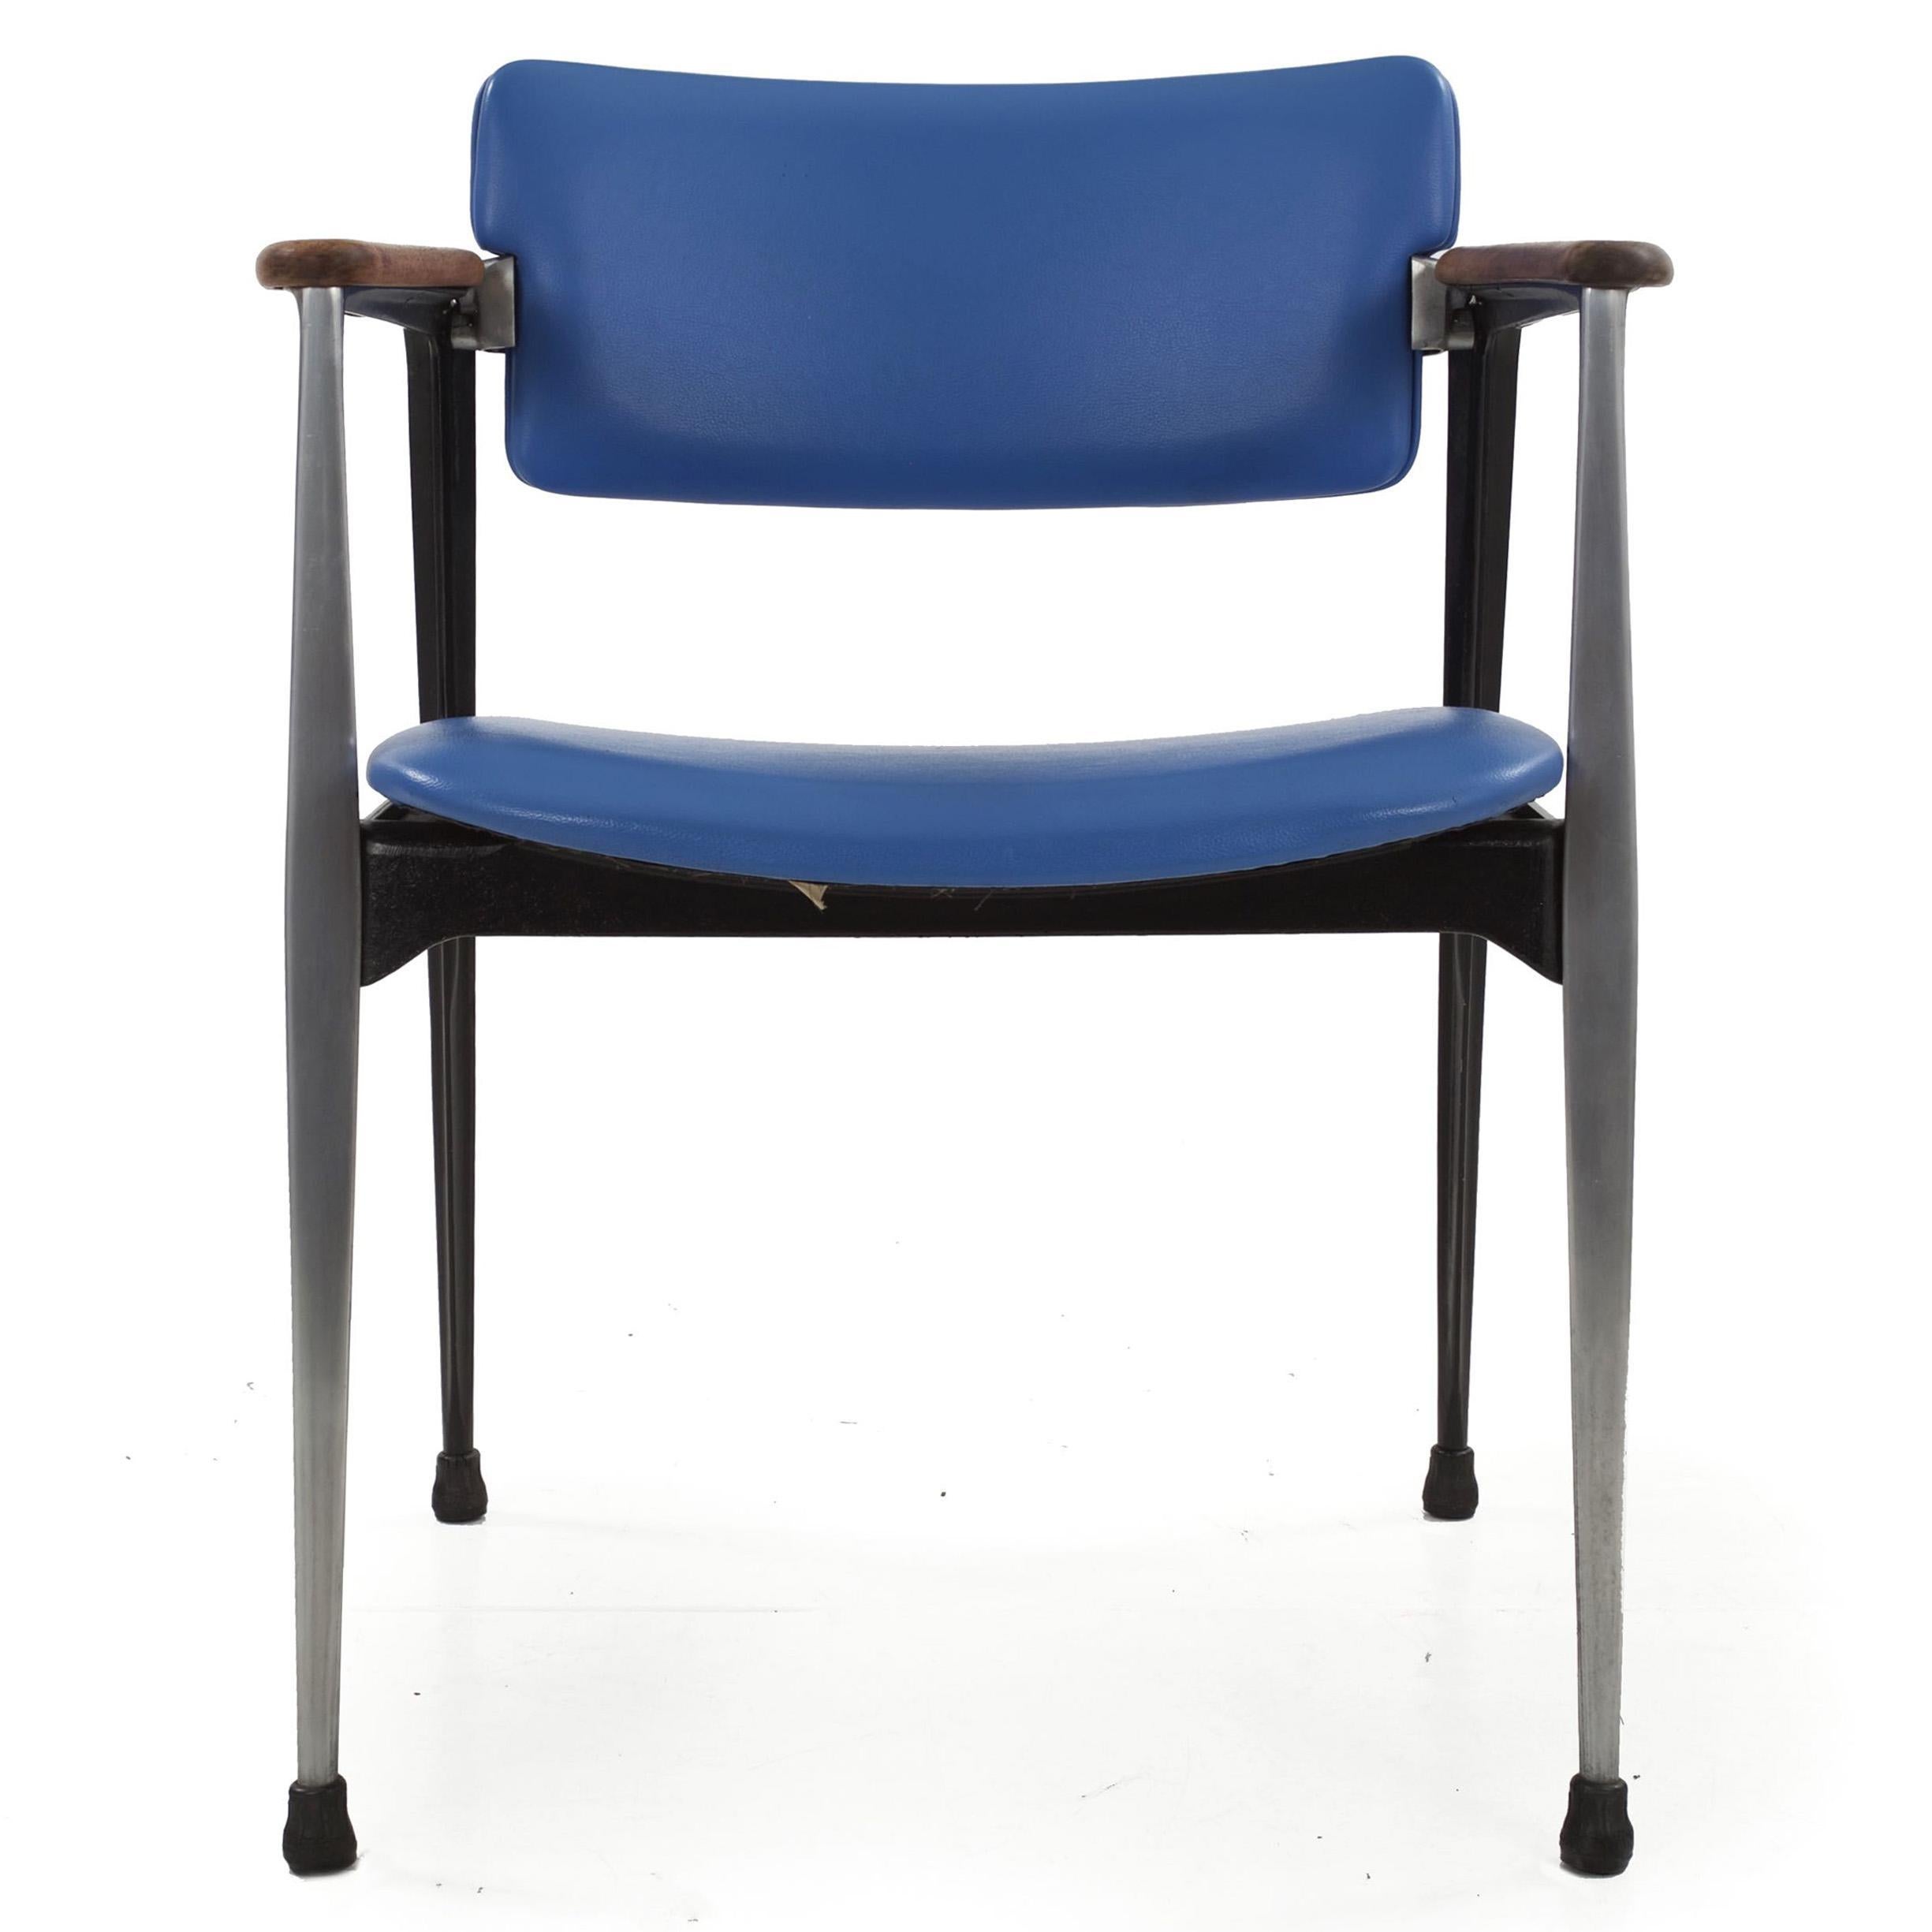 Built to last an eternity, this cast aluminum chair was designed by Dan Johnson for Shelby Williams and still retains the original manufacturer tag from Crucible Products. It retains the original light blue leatherette, which though worn still